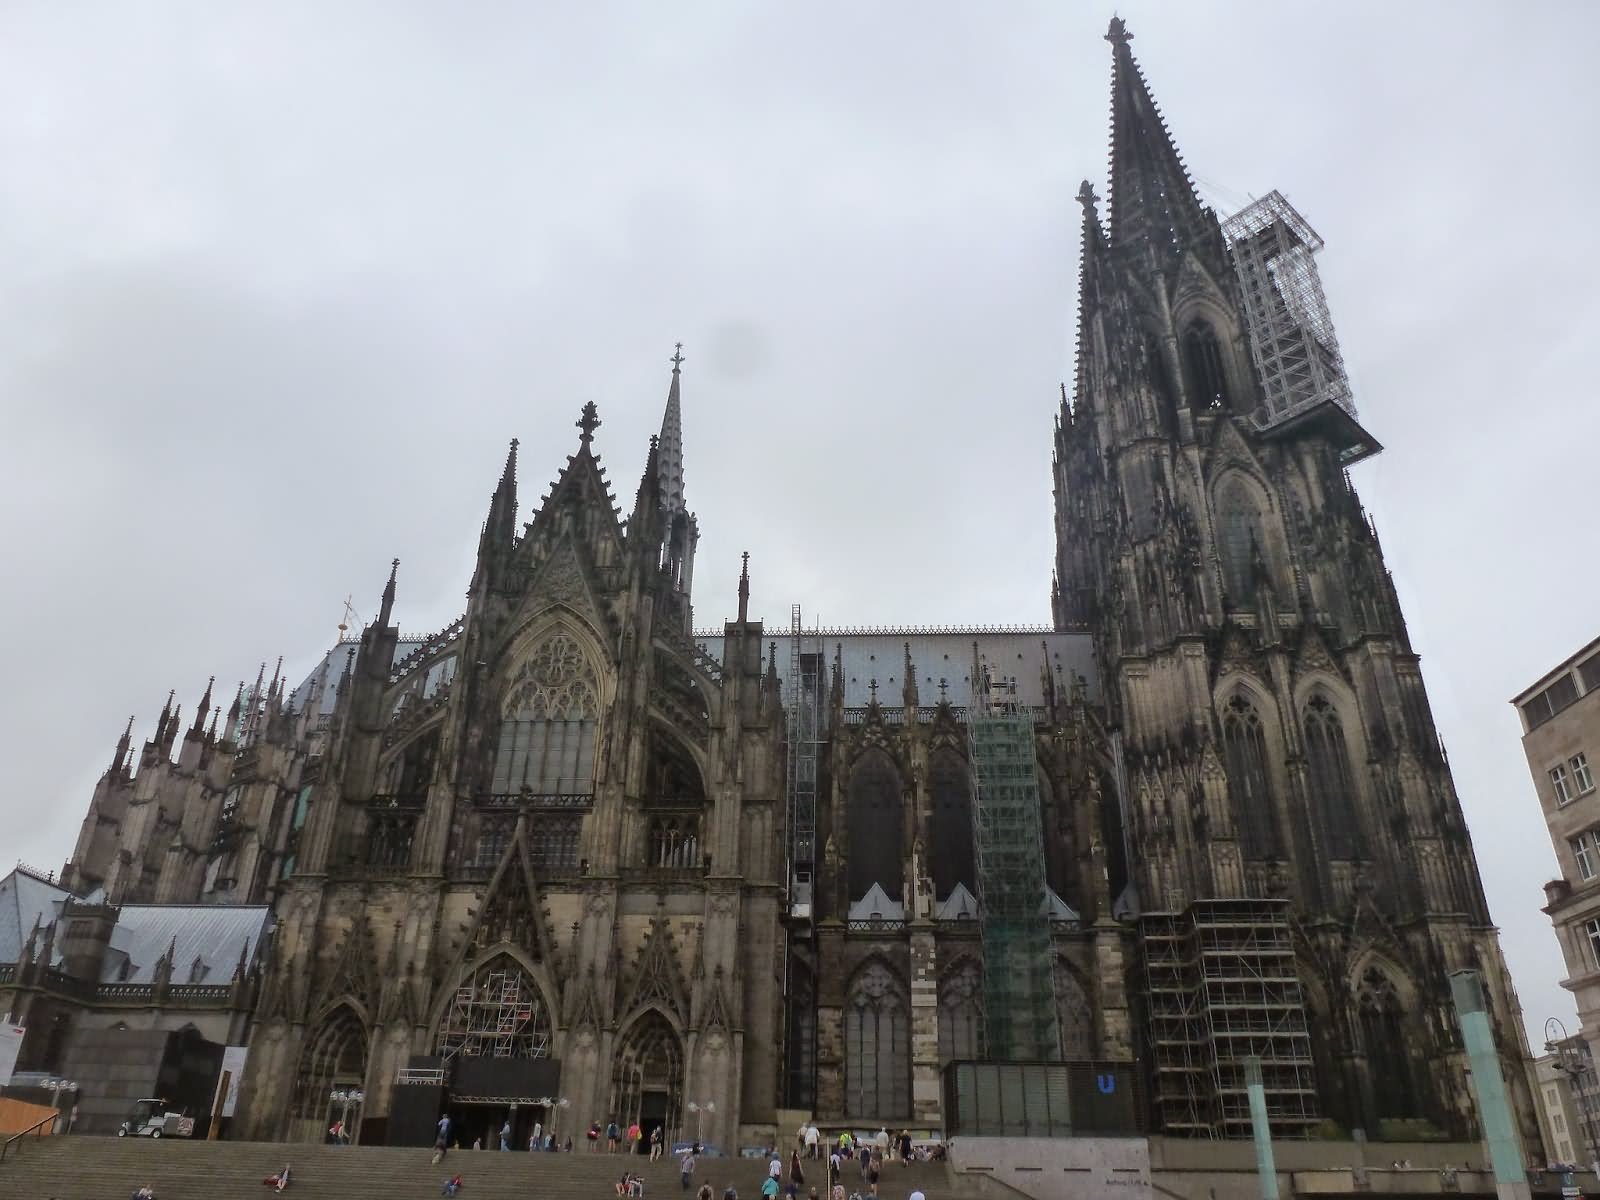 Front Facade Of The Cologne Cathedral In Cologne, Germany